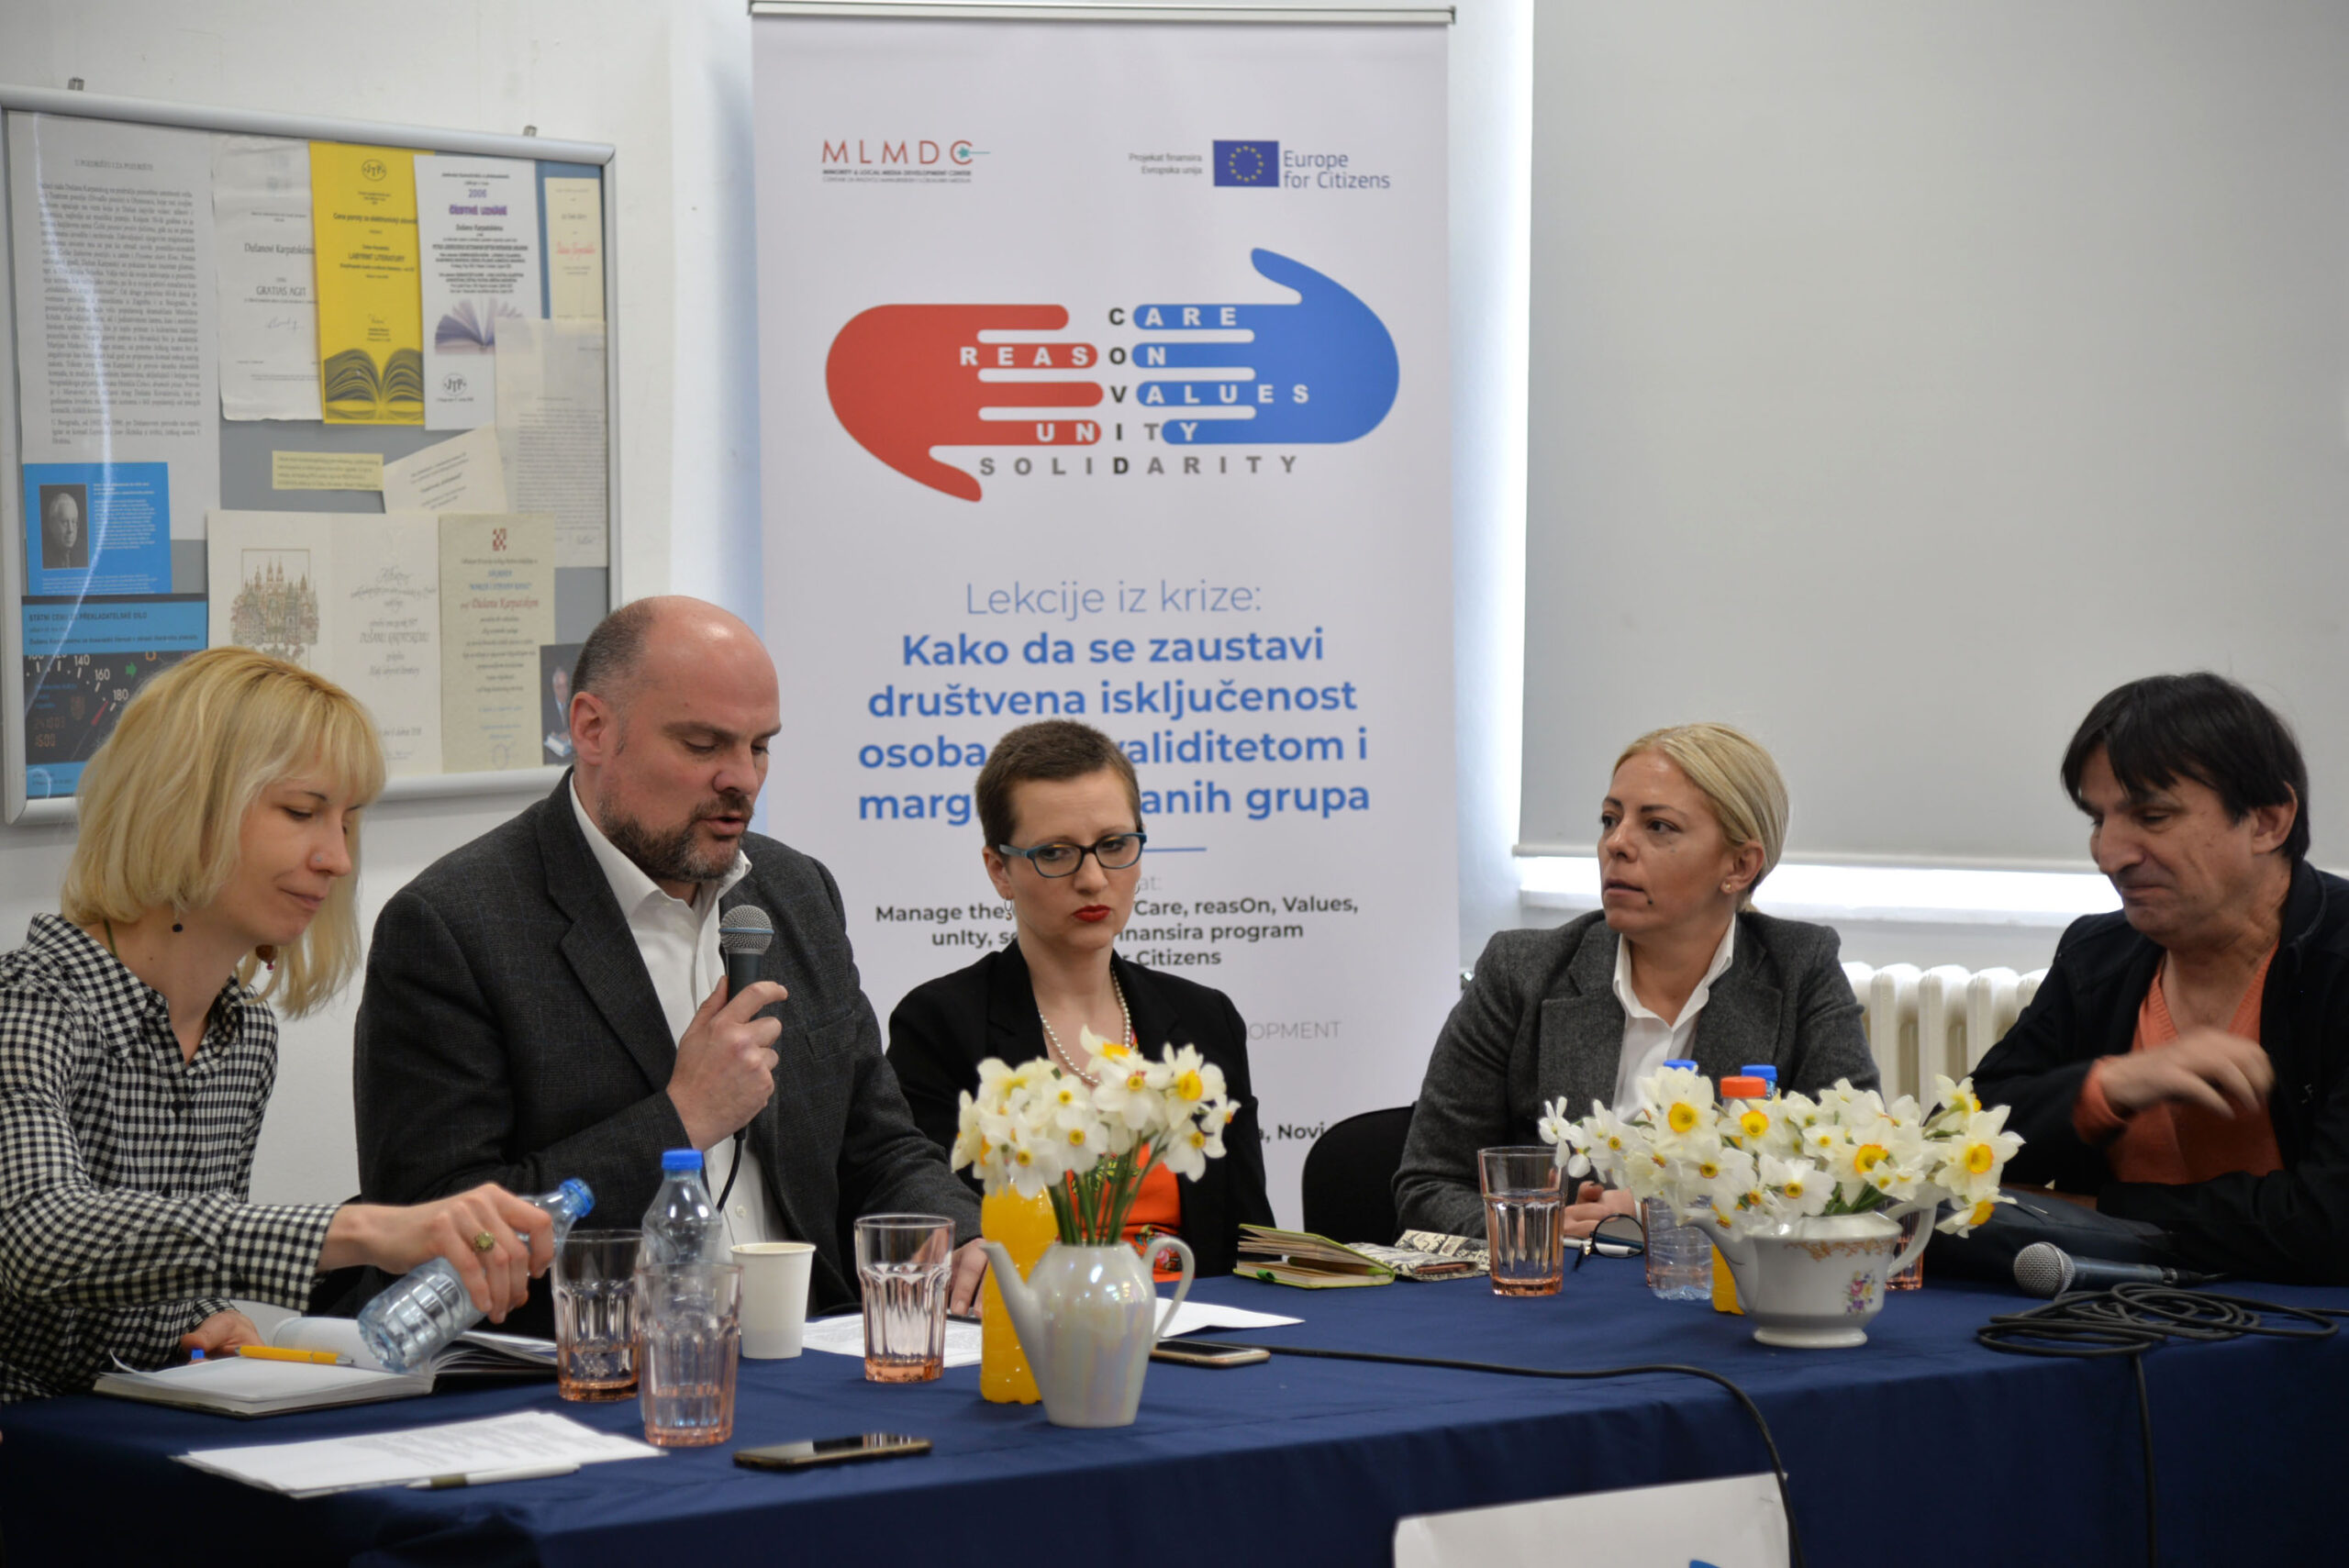 IZ KRUGA VOJVODINA at the round table on informing persons with disabilities